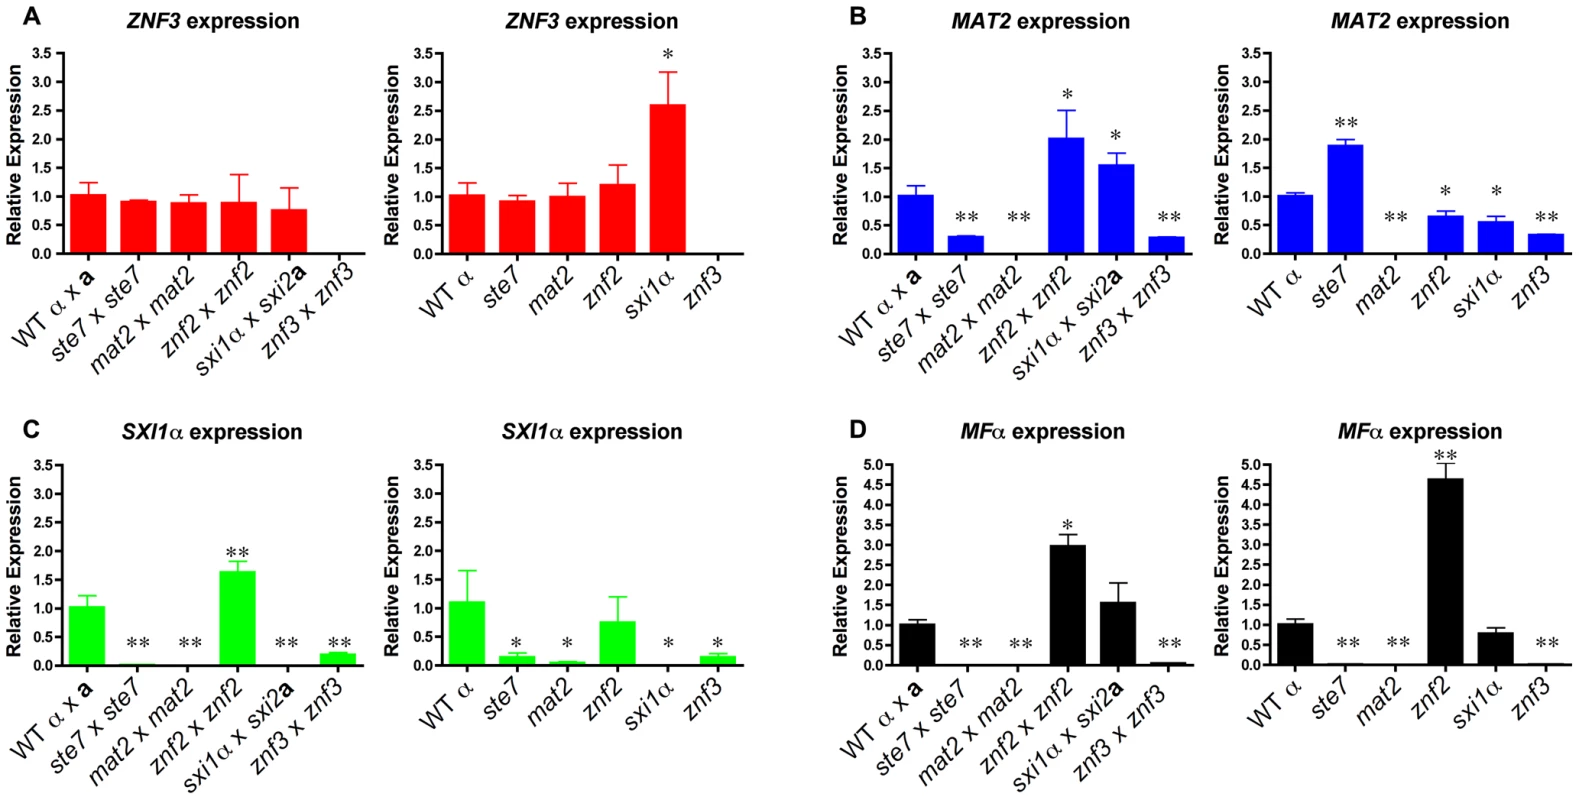 Znf3 regulates the expression of Mat2 and promotes pheromone production.